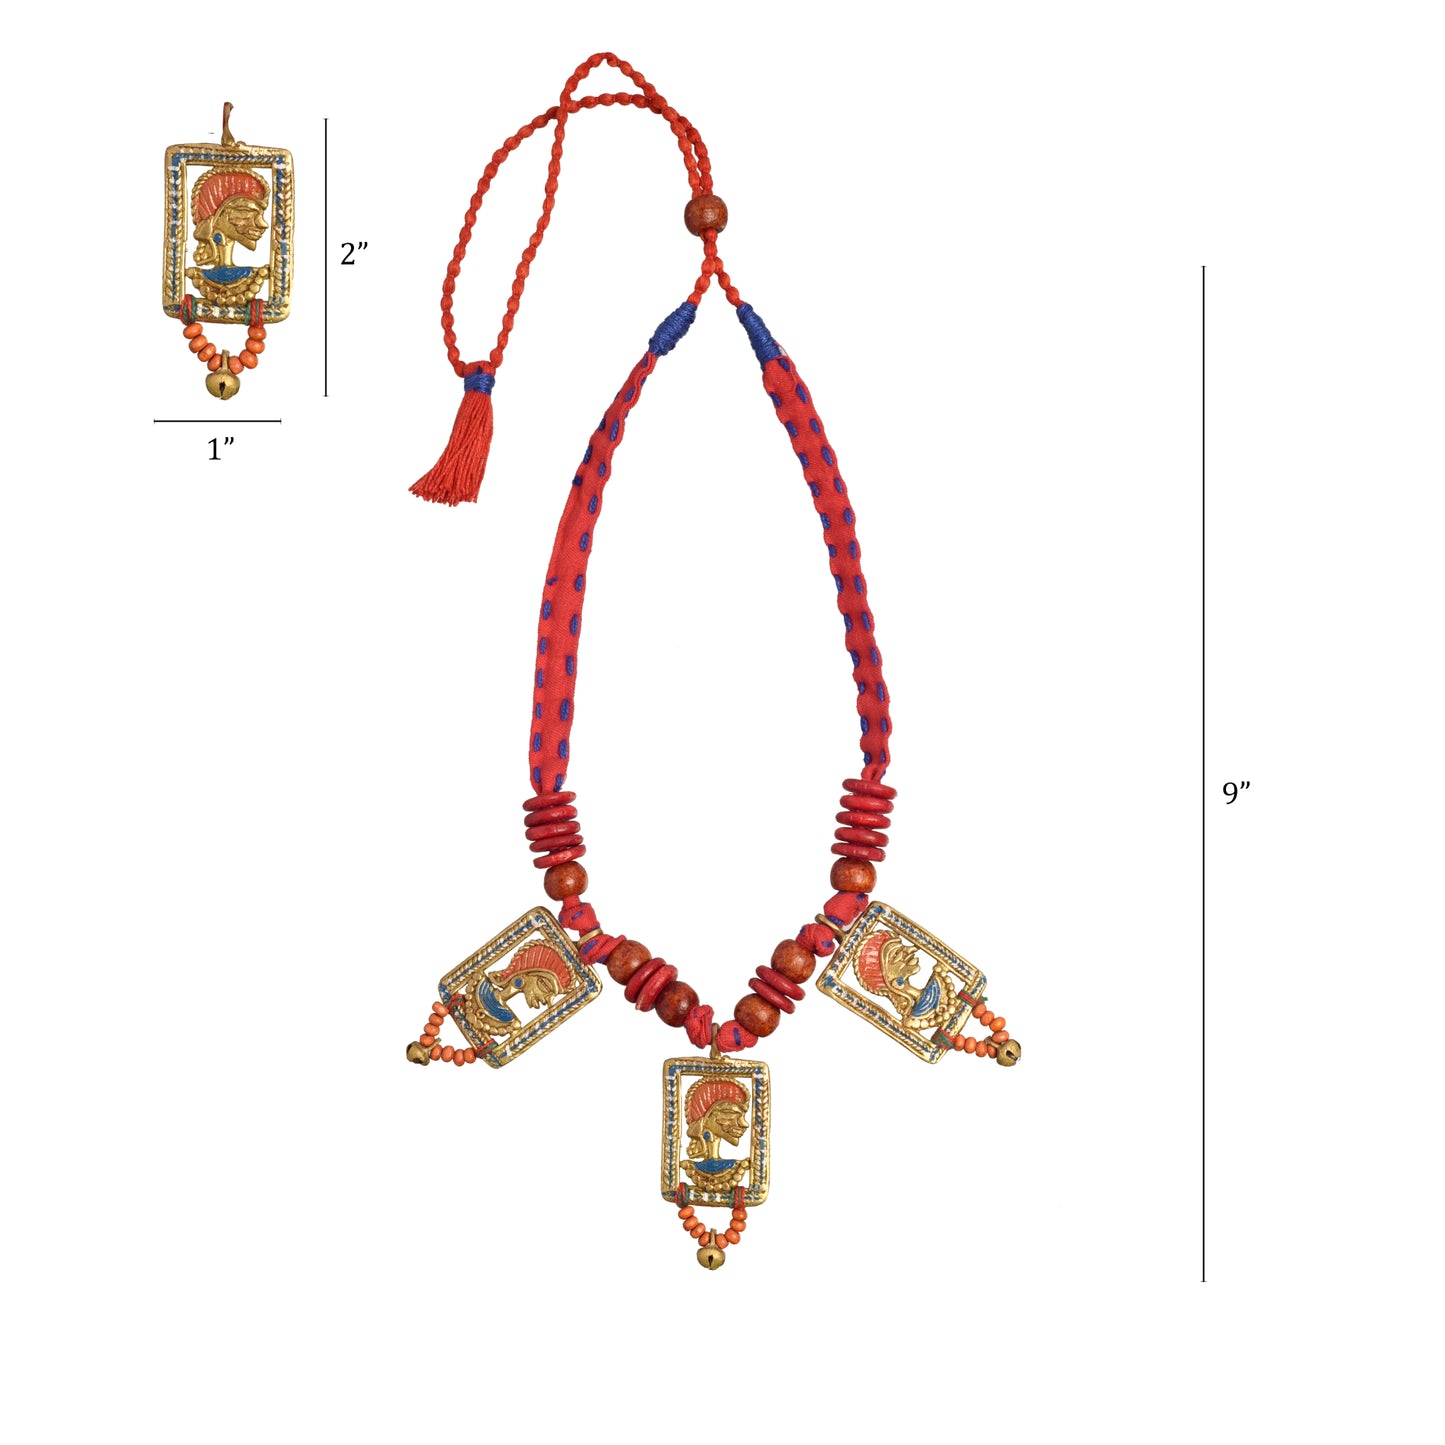 The Empress in Window Handcrafted Tribal Dokra Necklace